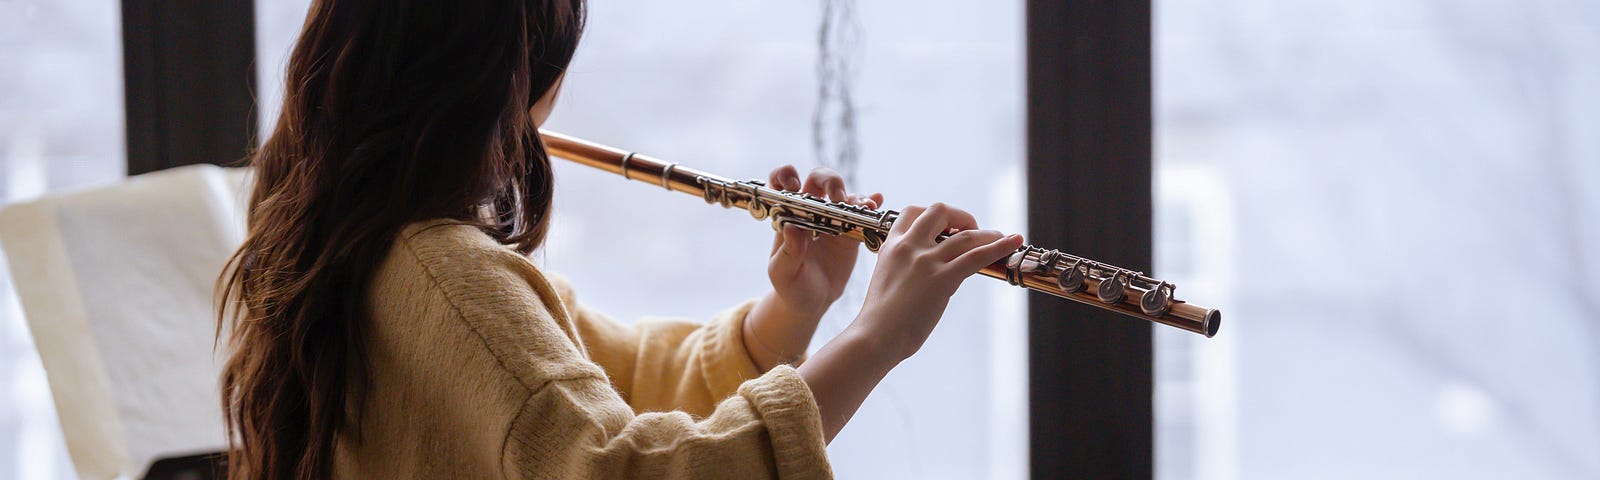 Photo of woman playing flute next to window in studio. She is facing the window, face away from the camera.